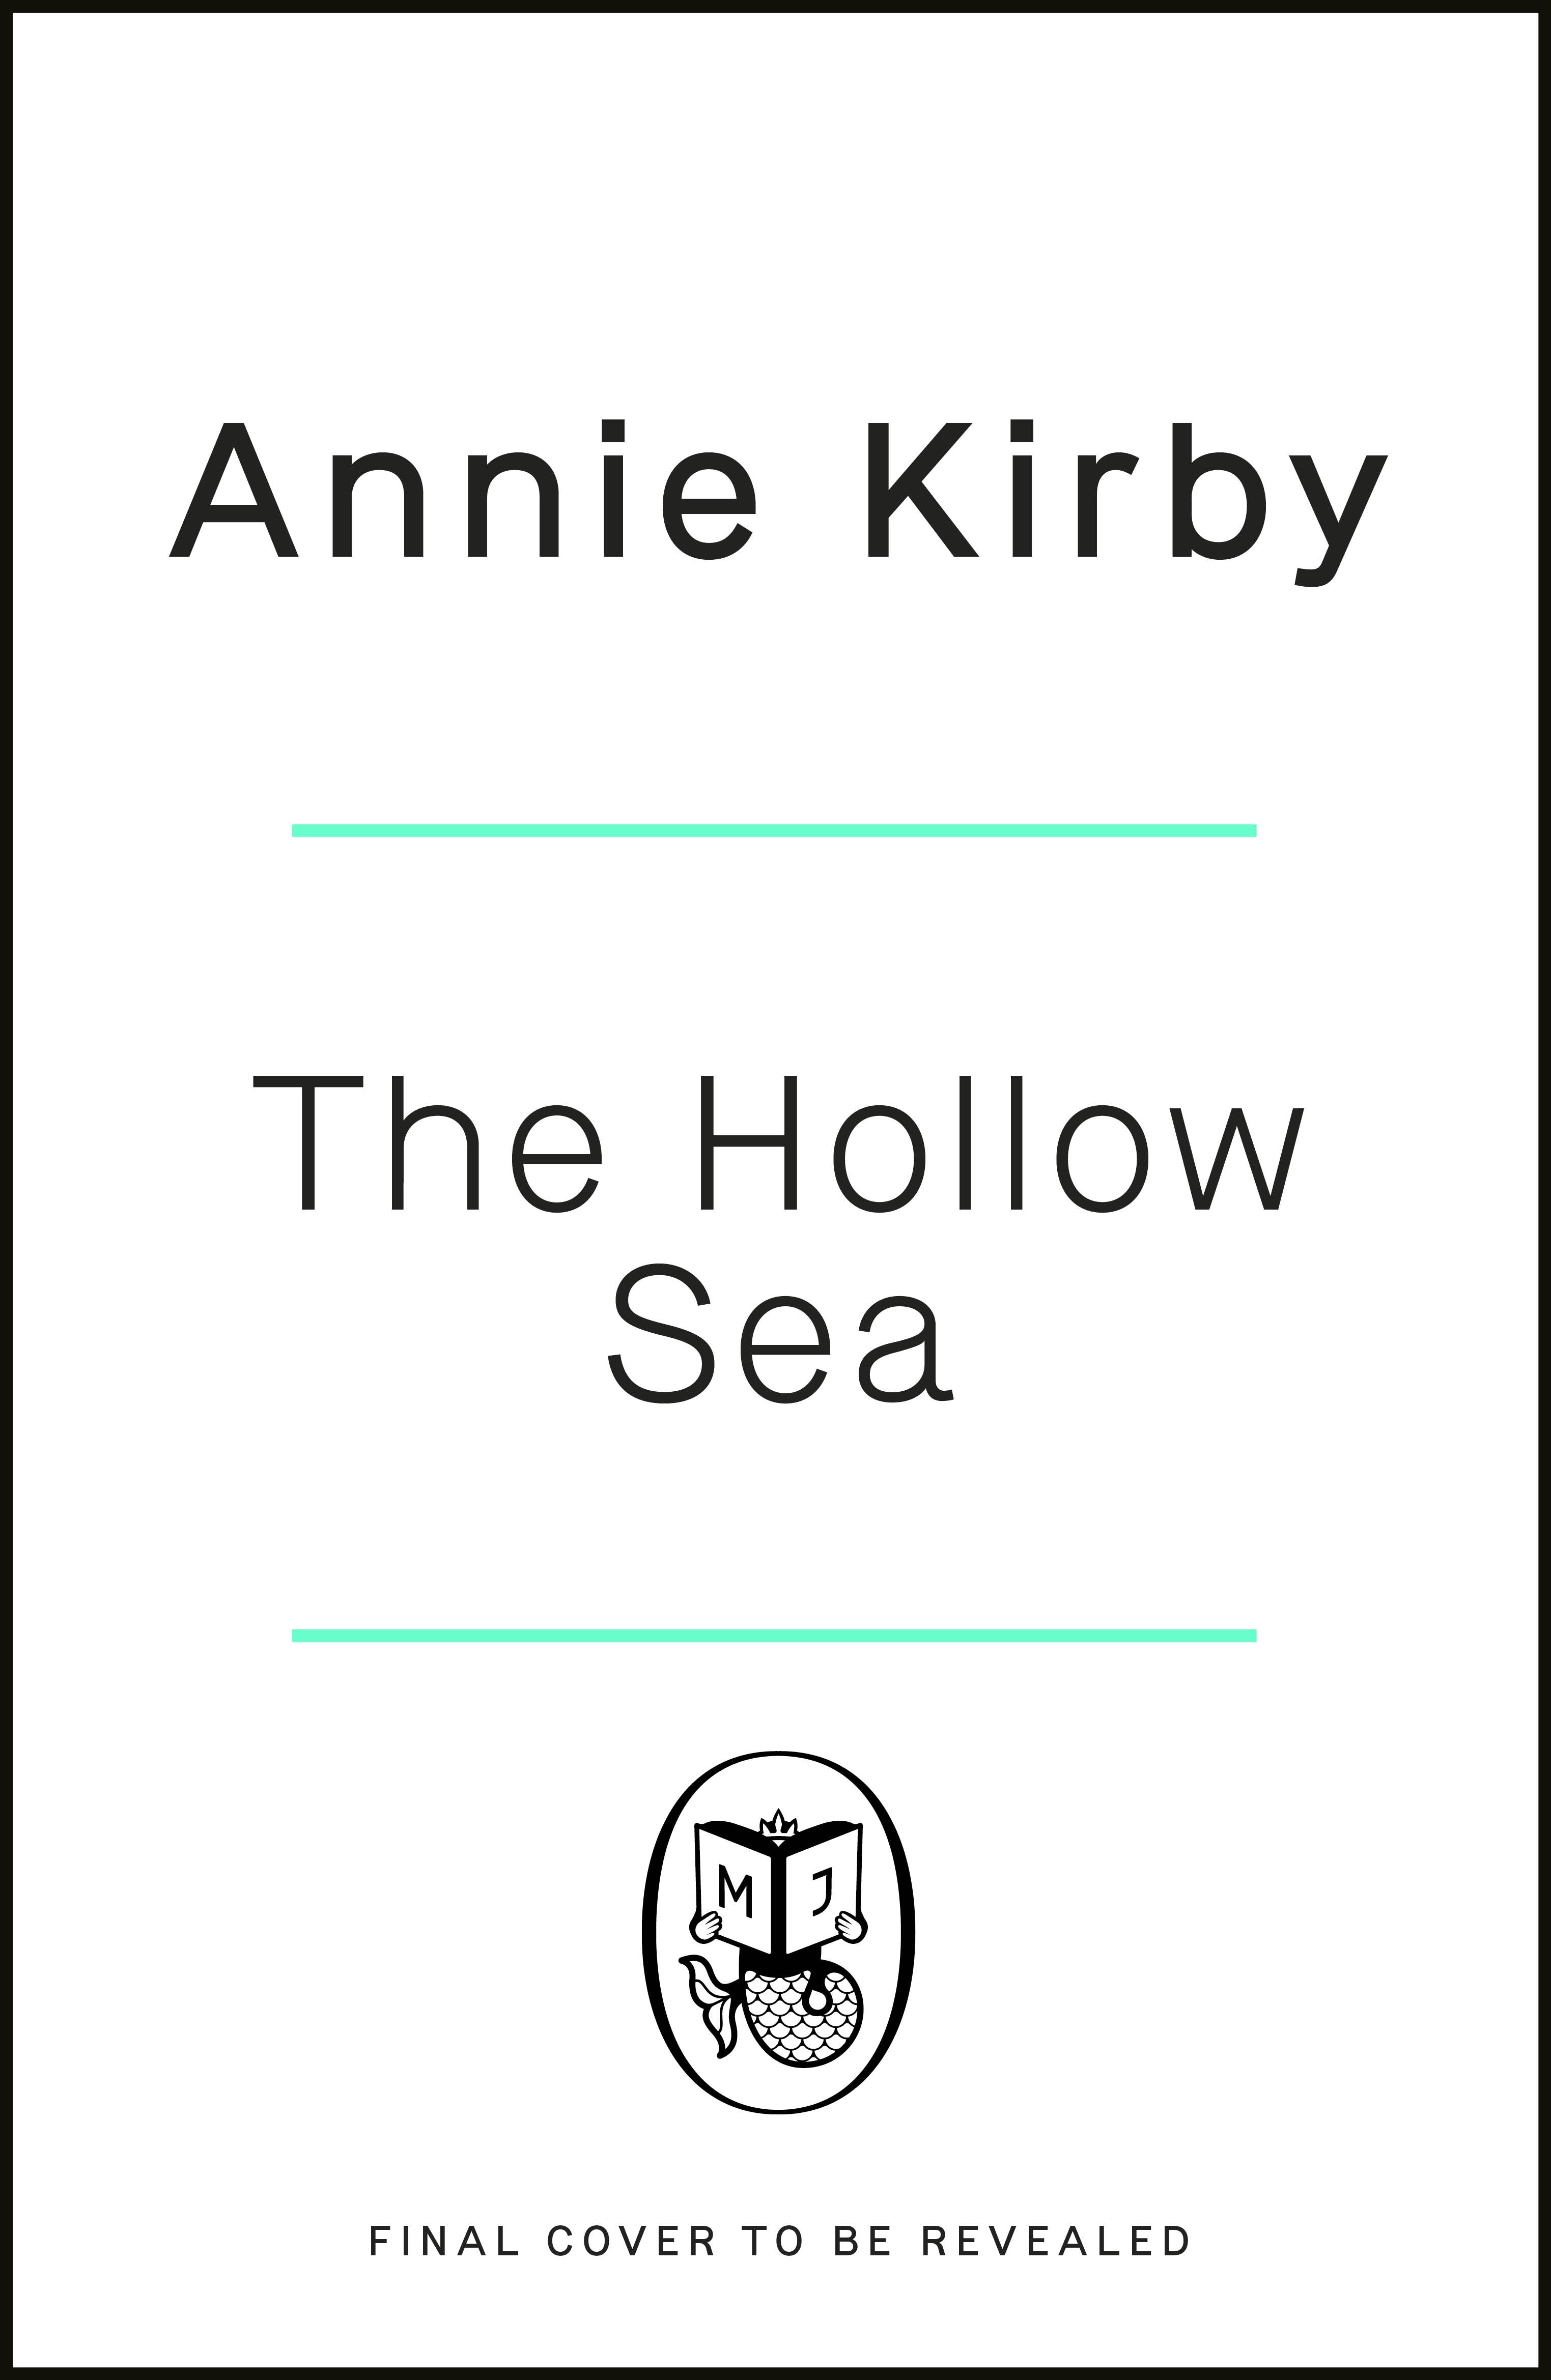 Book “The Hollow Sea” by Anne Kirby — August 18, 2022